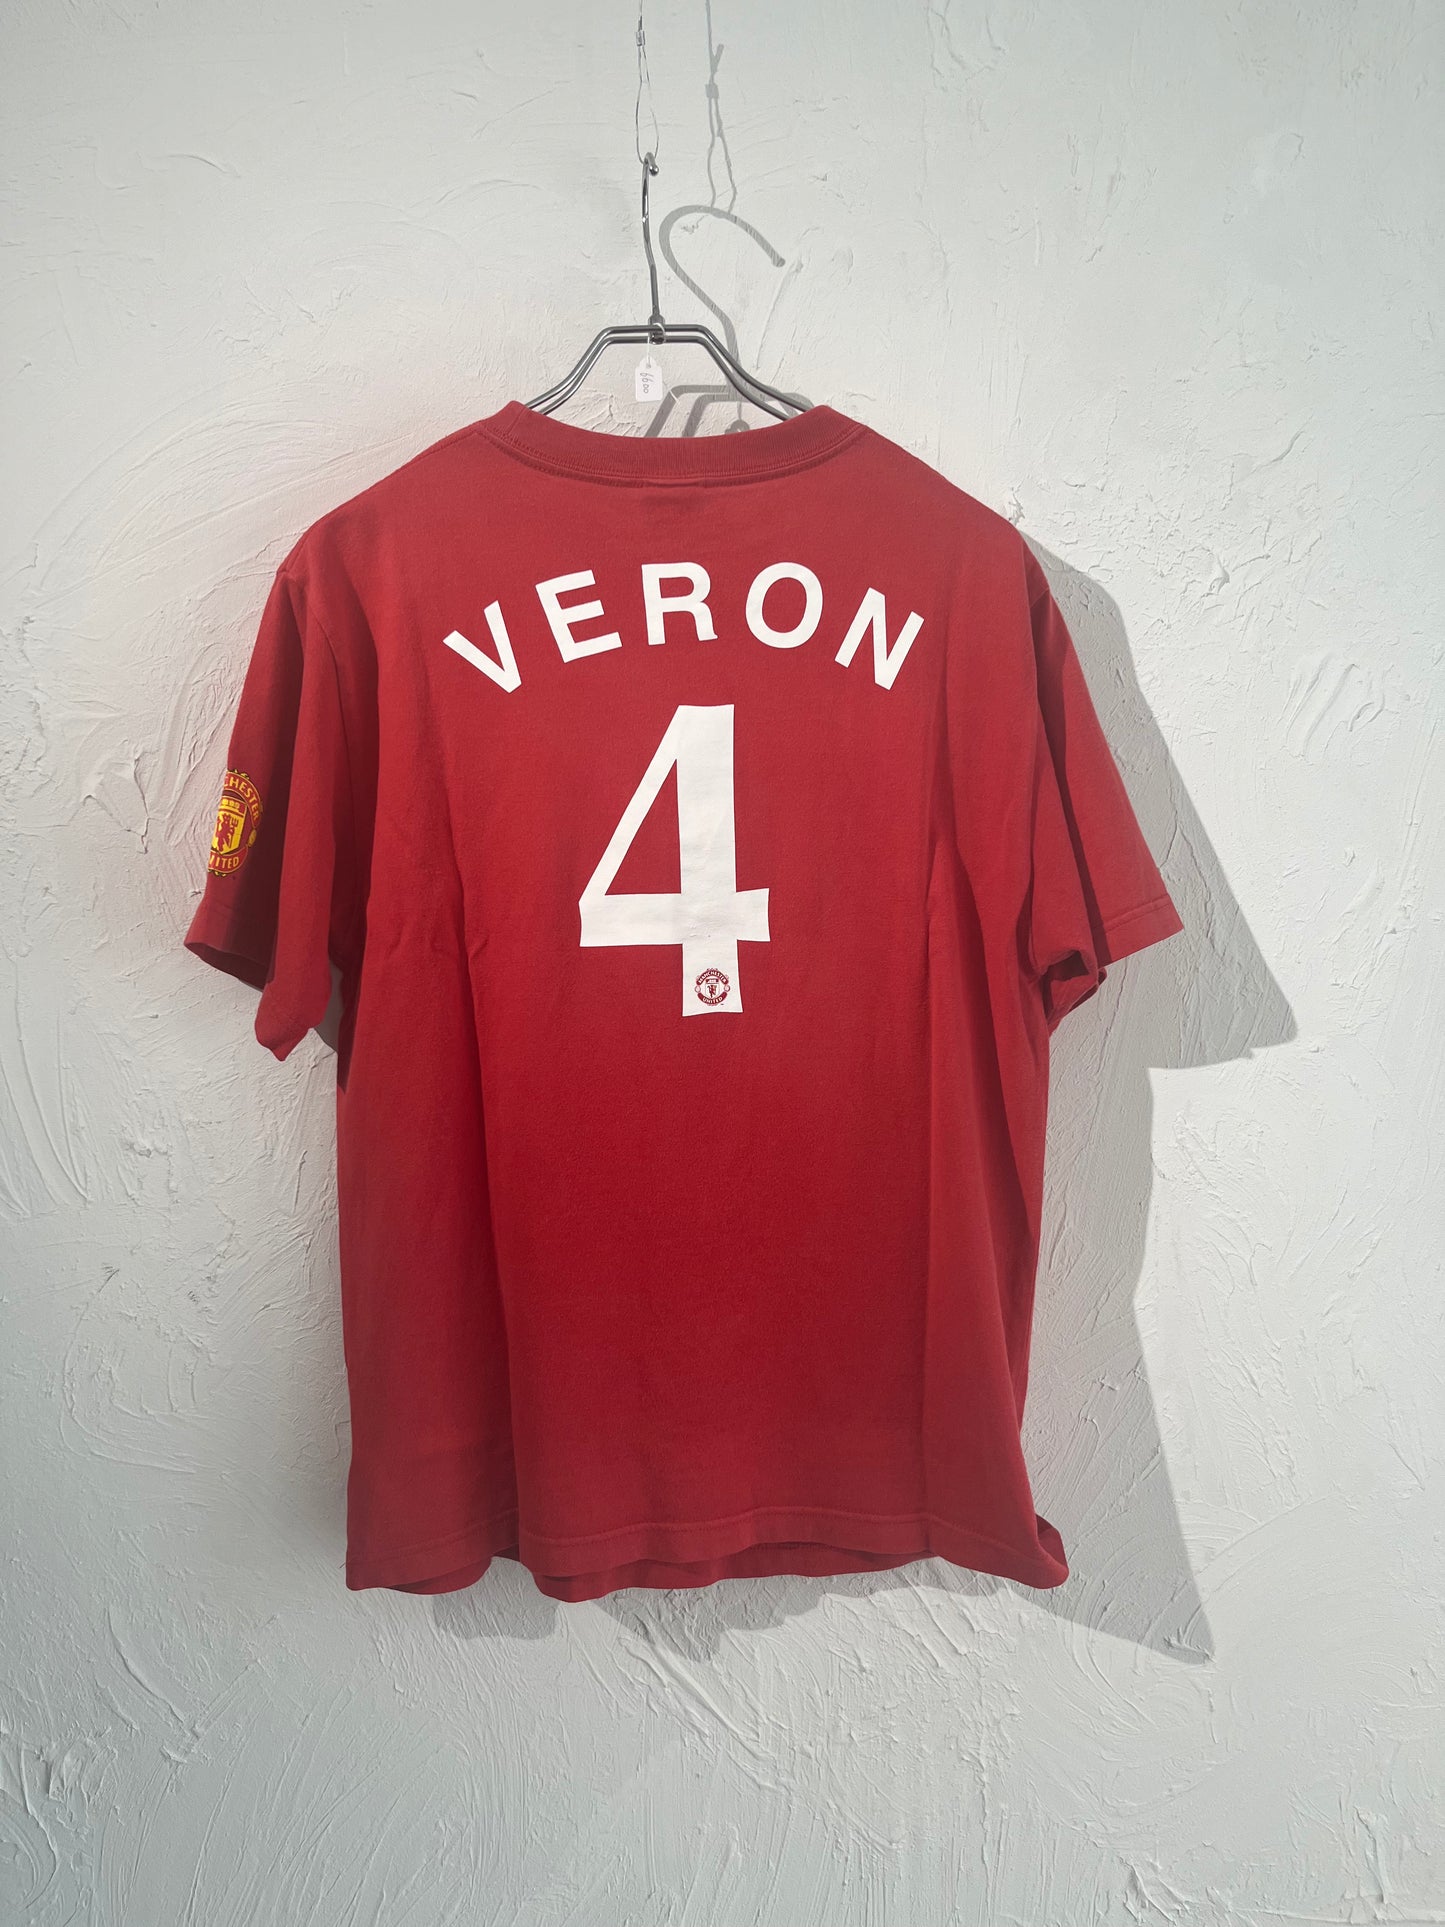 00s Manchester United VERON TEE